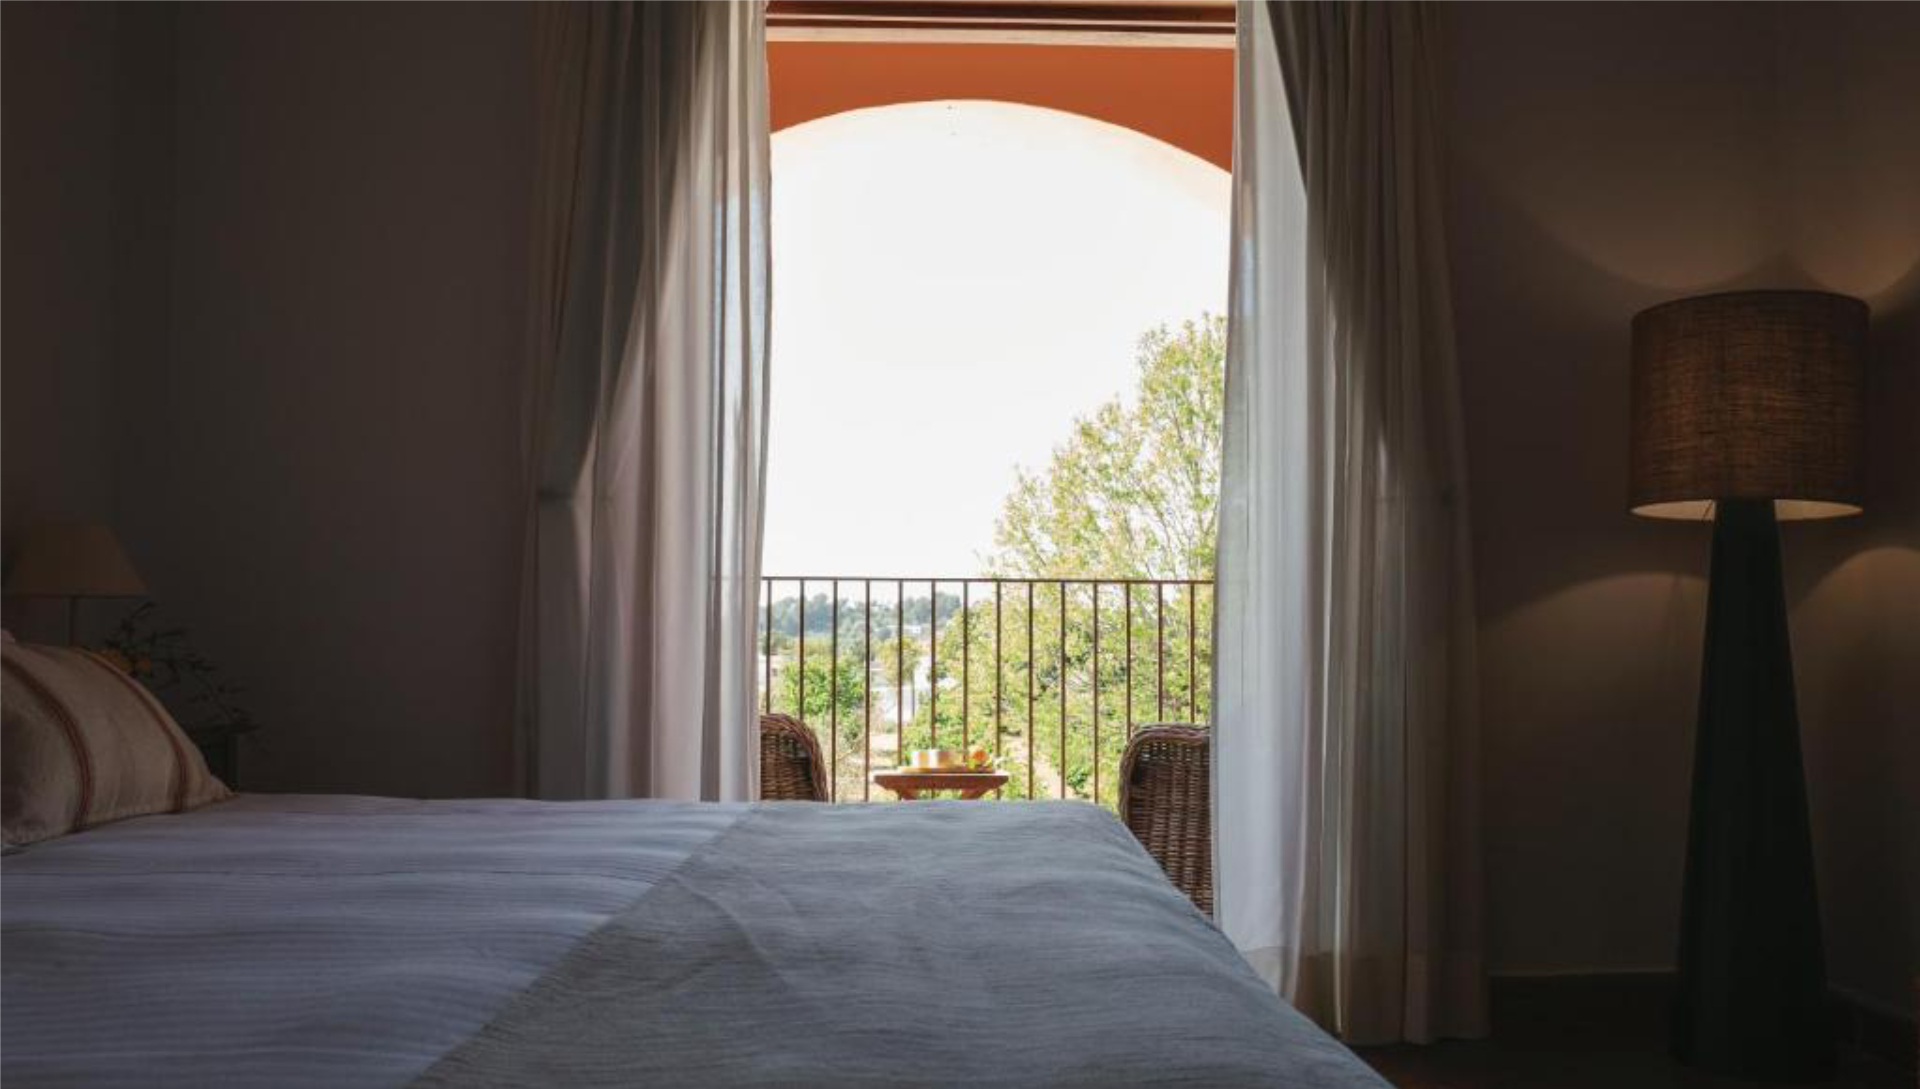 Can Arabi - Double Room with Views Image from Rural Hotels in Ibiza